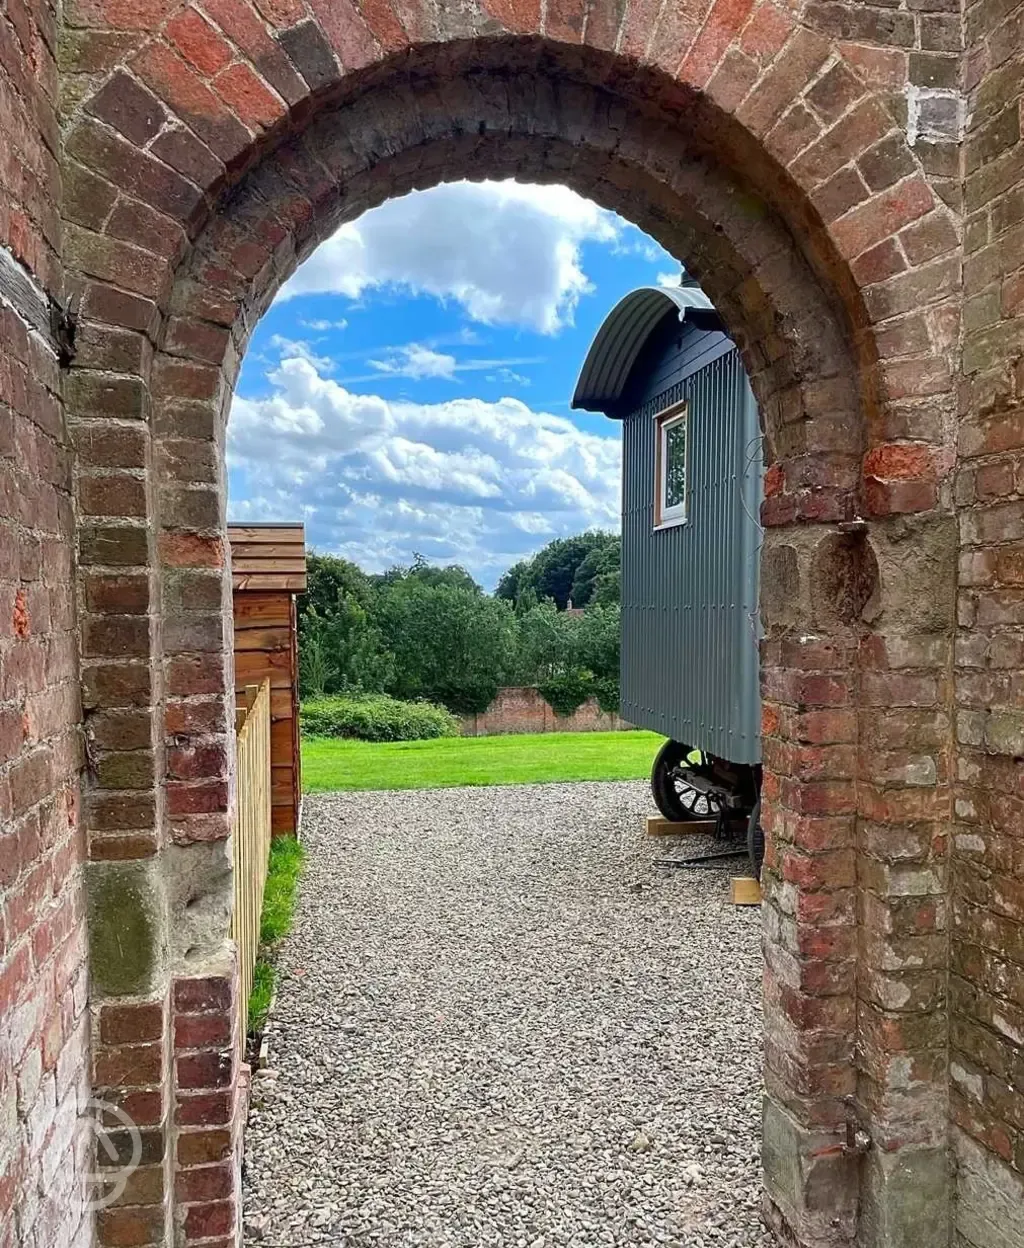 Entrance to the walled garden